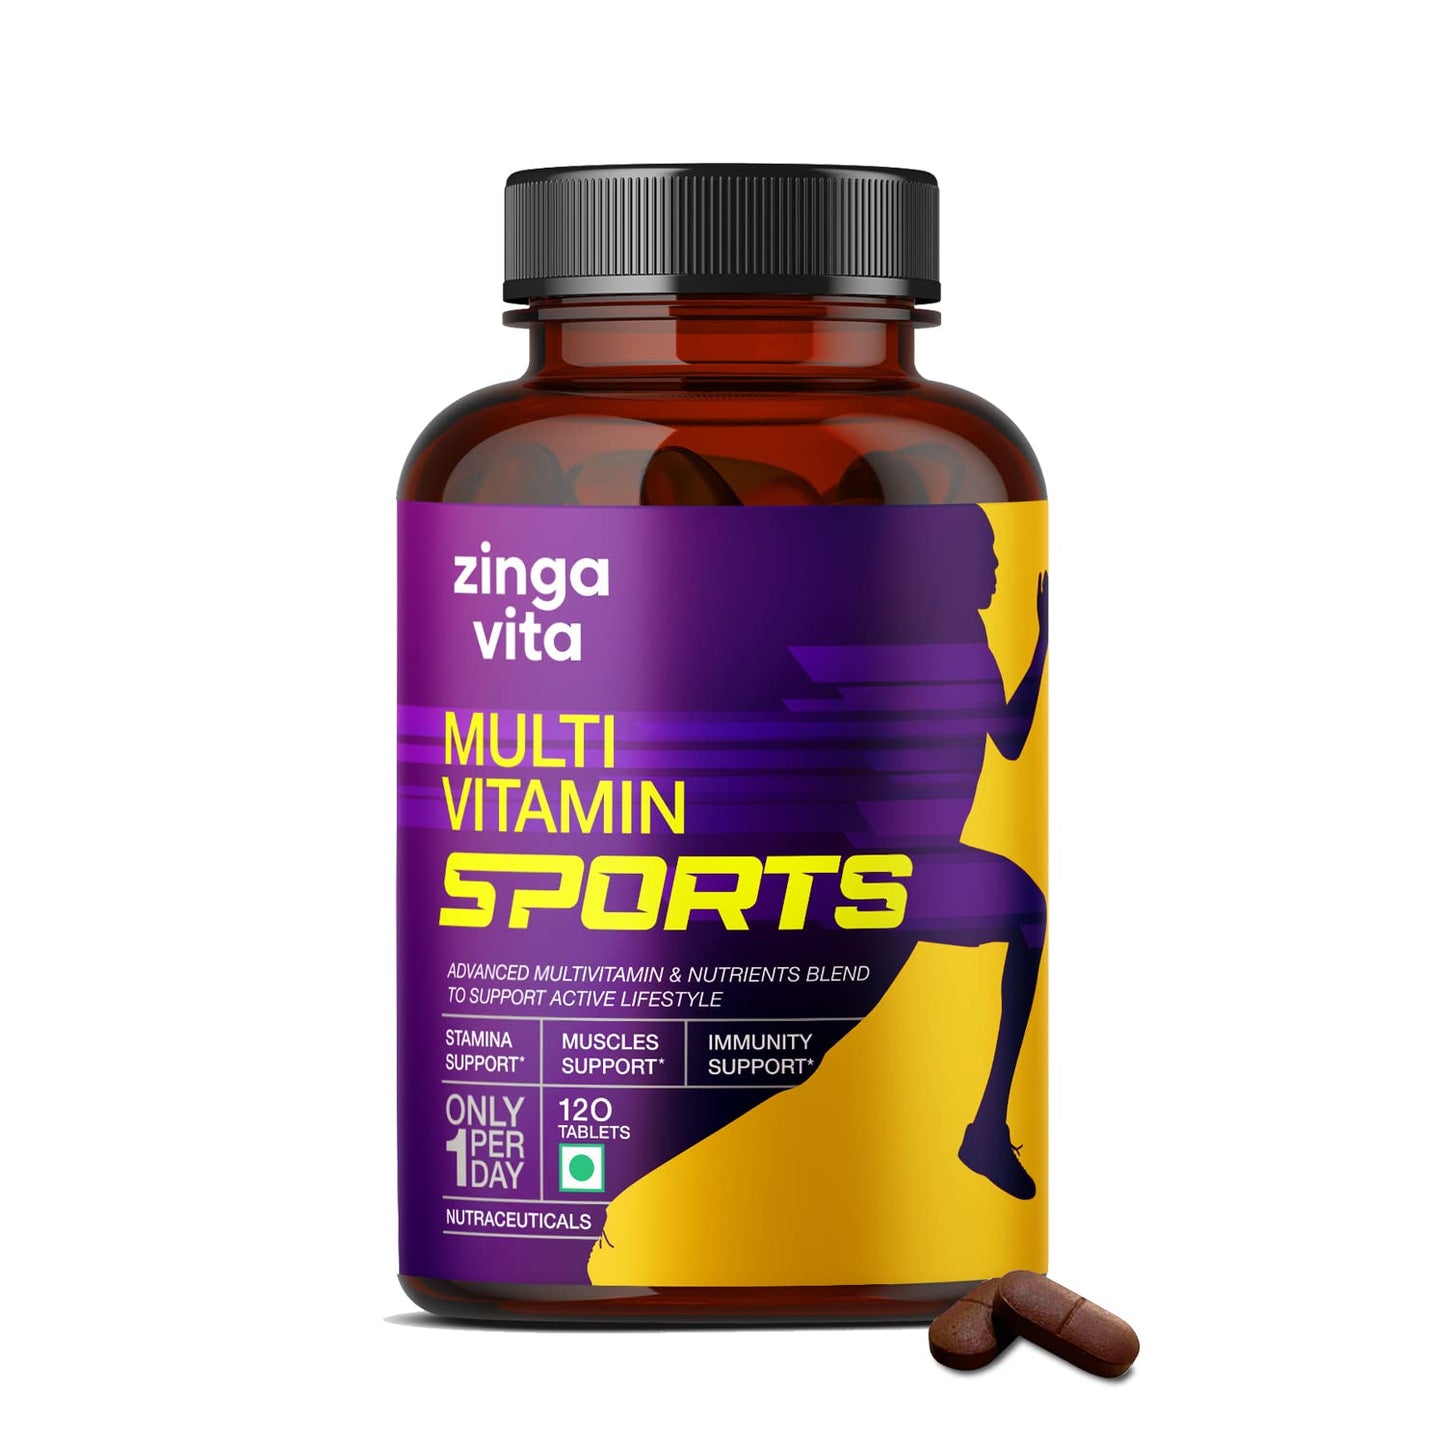 Zingavita Multivitamin Sports Advanced Daily for Men & Women (120 Tablets) - With 35+ Nutrients, Amid Energy, Stamina, Immunity, Joint & Muscle Health